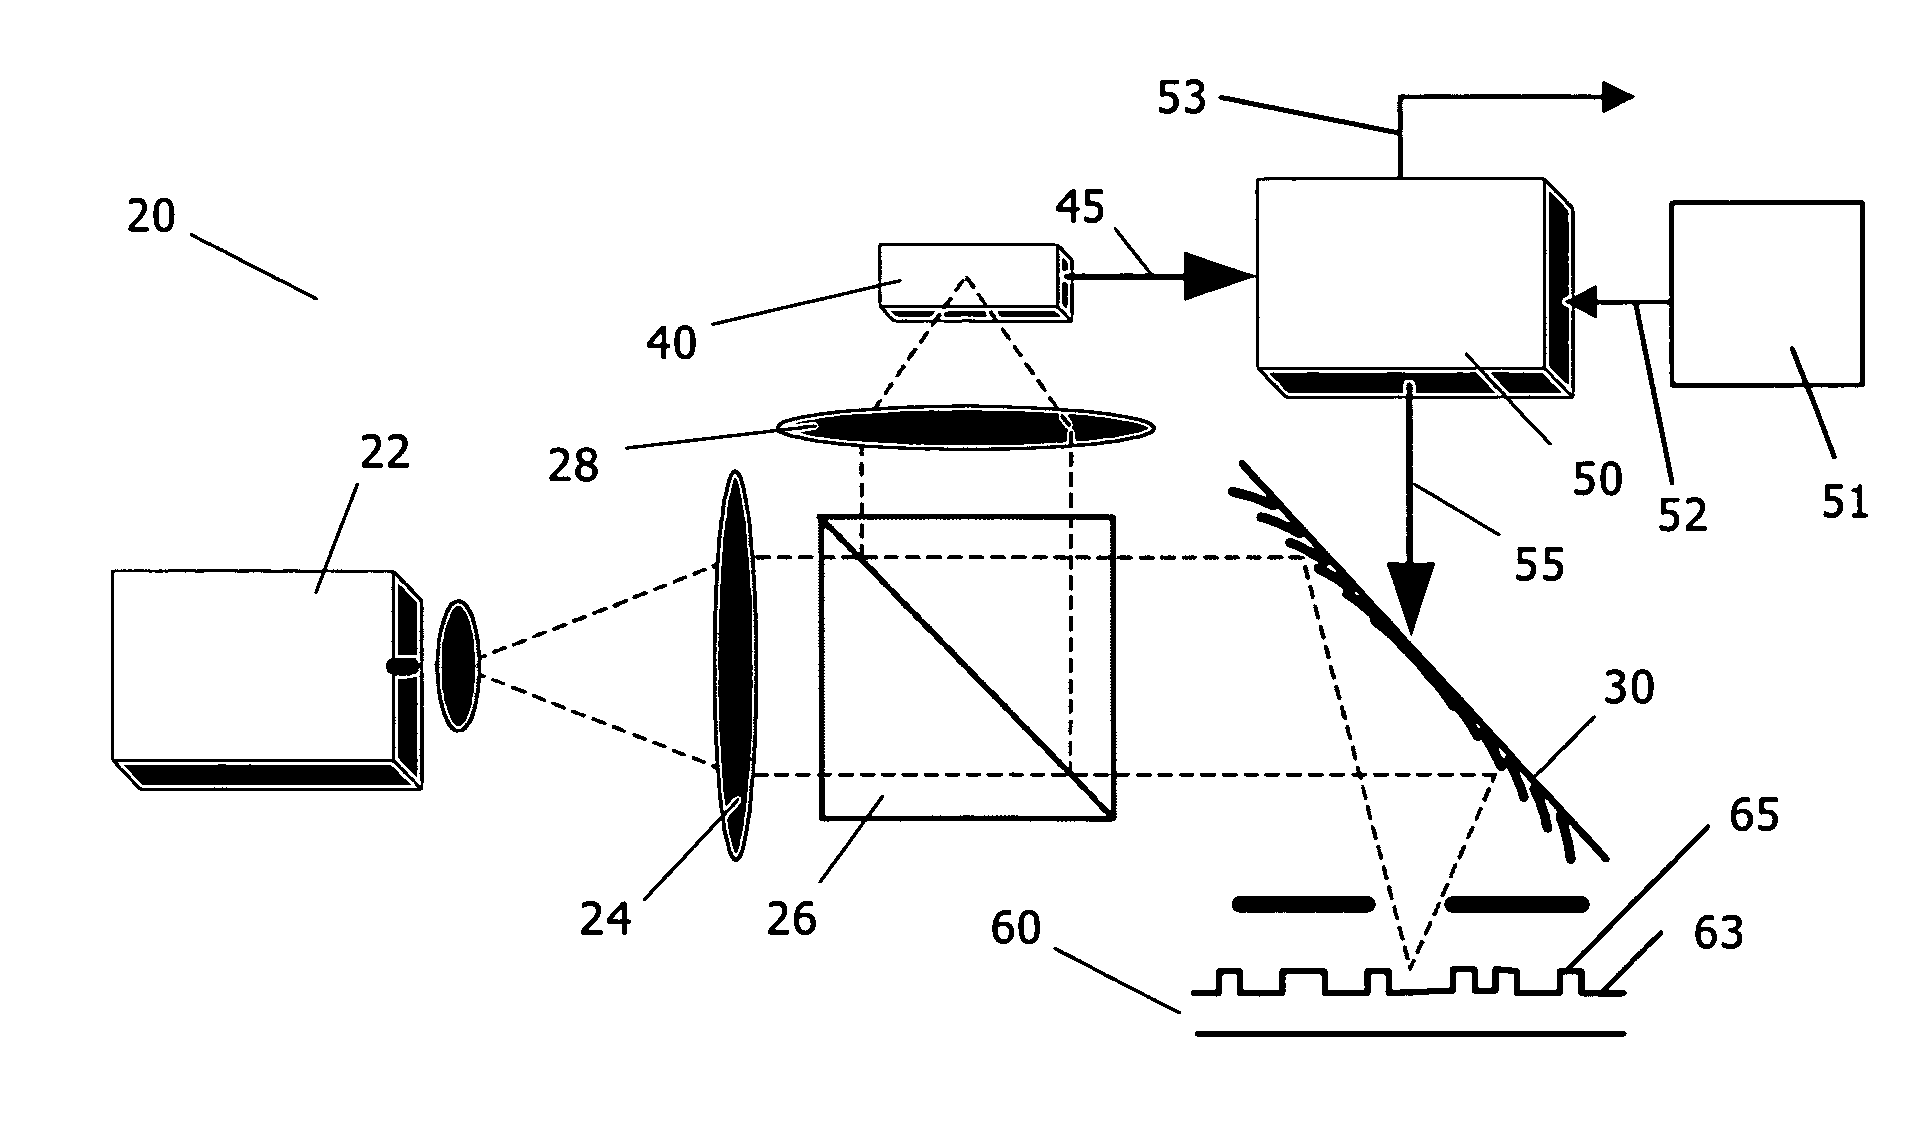 Optical pick-up device using micromirror array lens